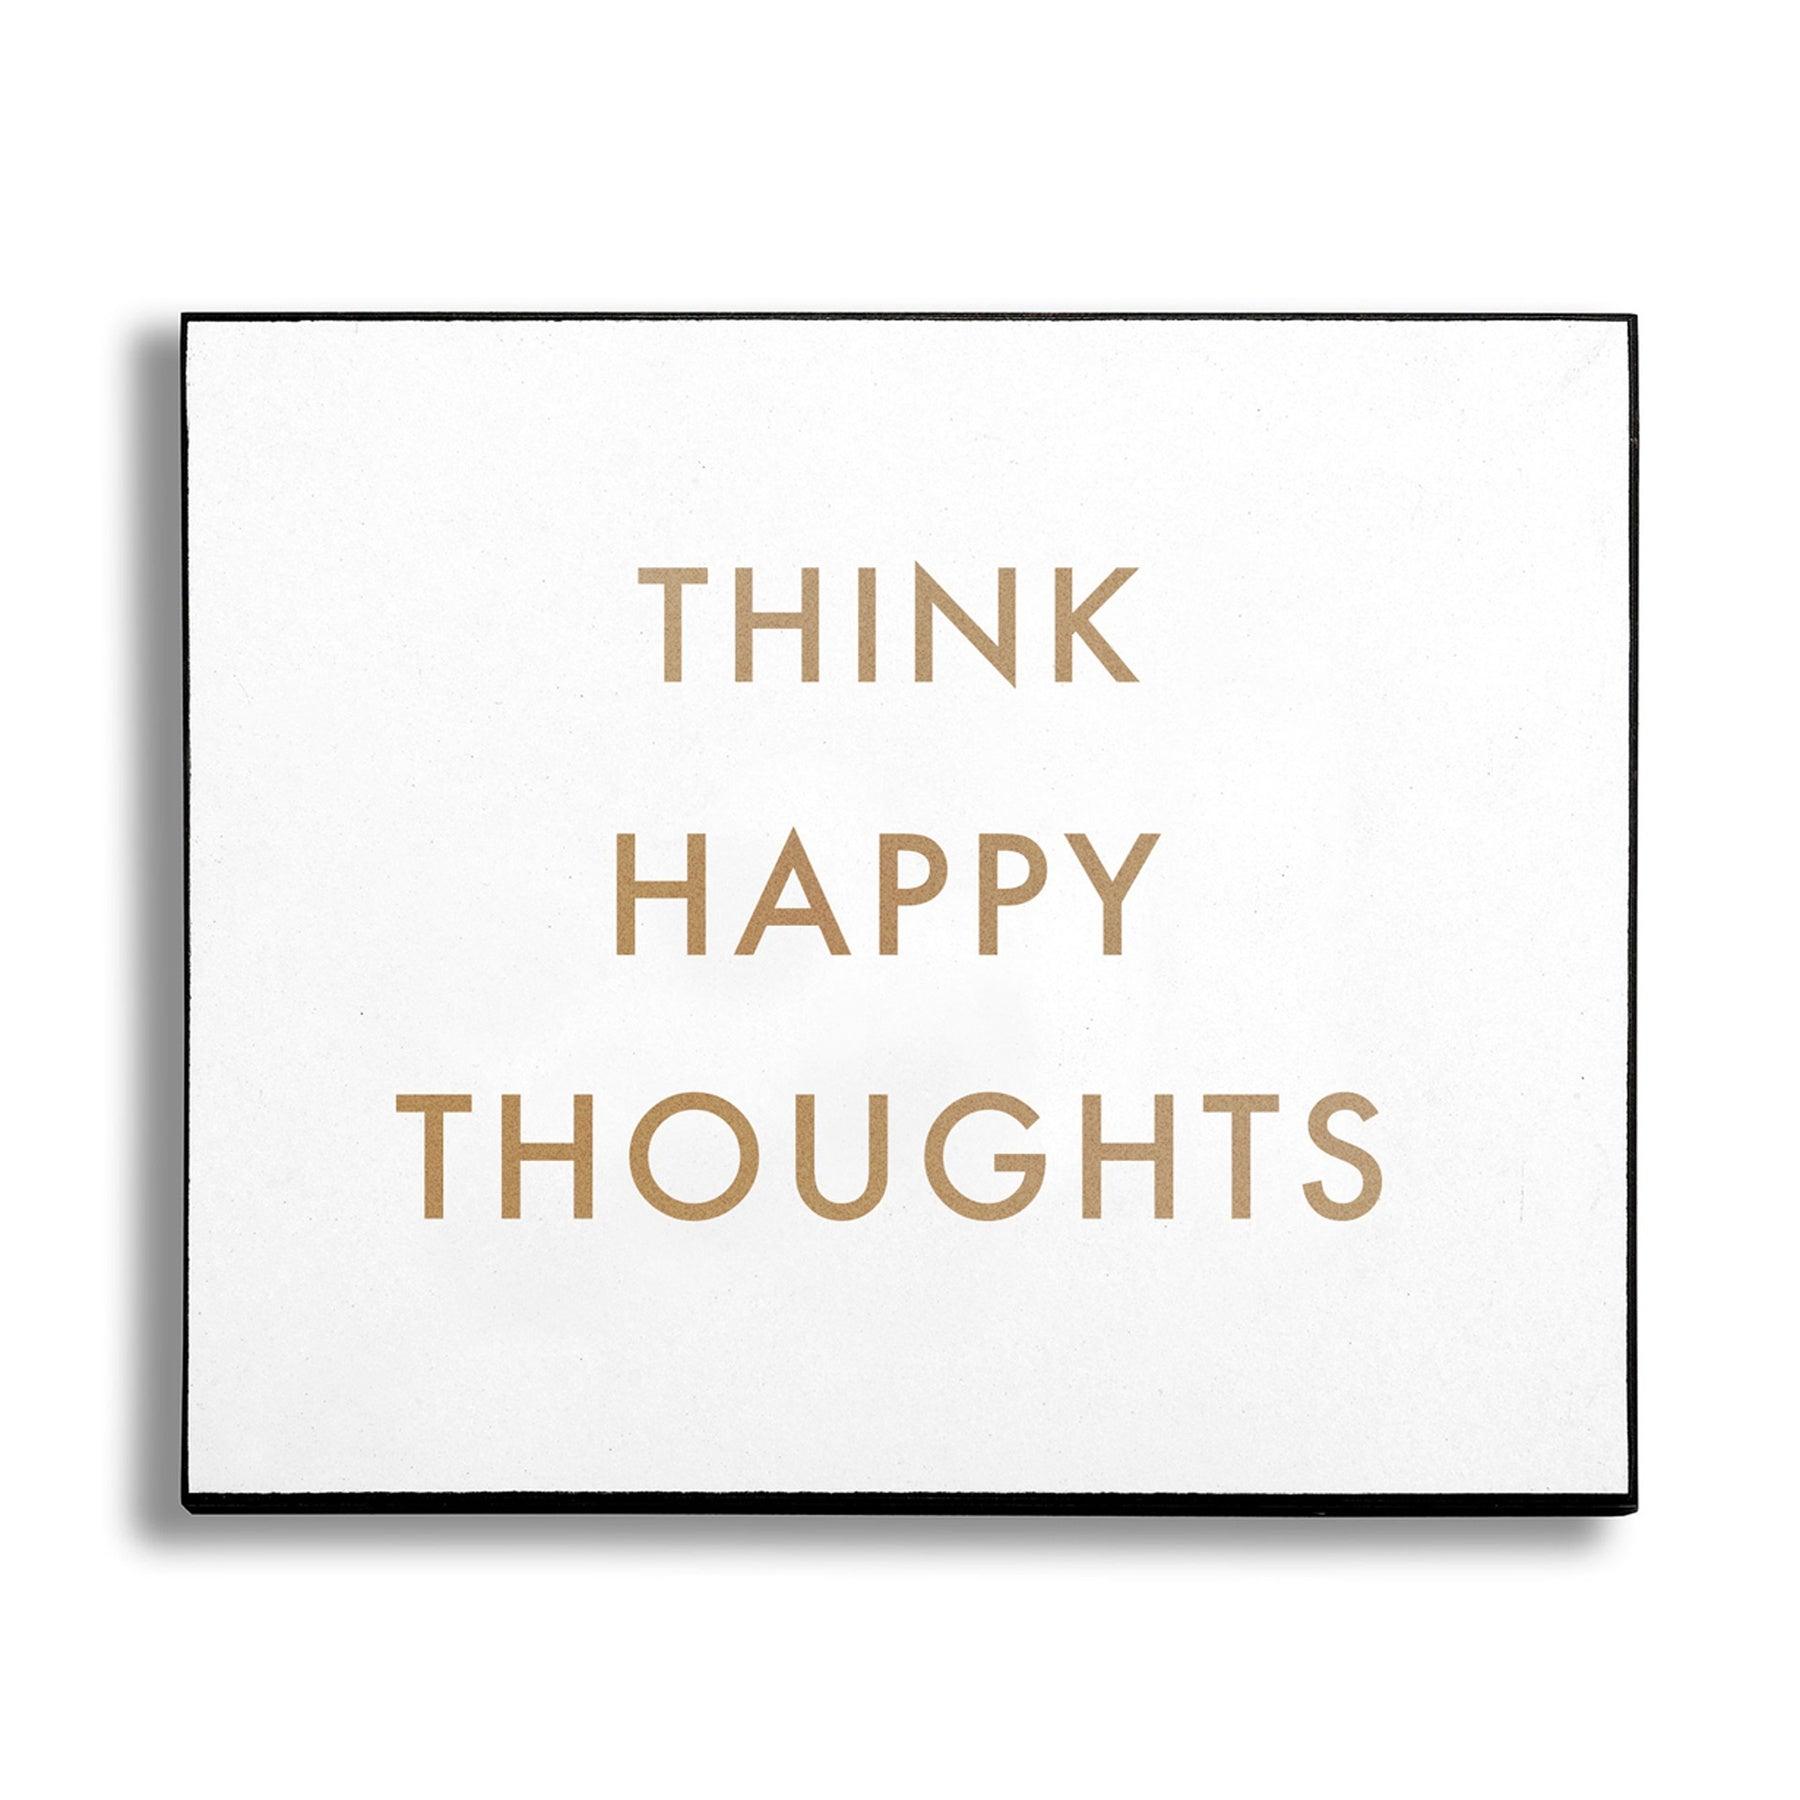 Think Happy Thoughts Gold Foil Plaque - Vookoo Lifestyle